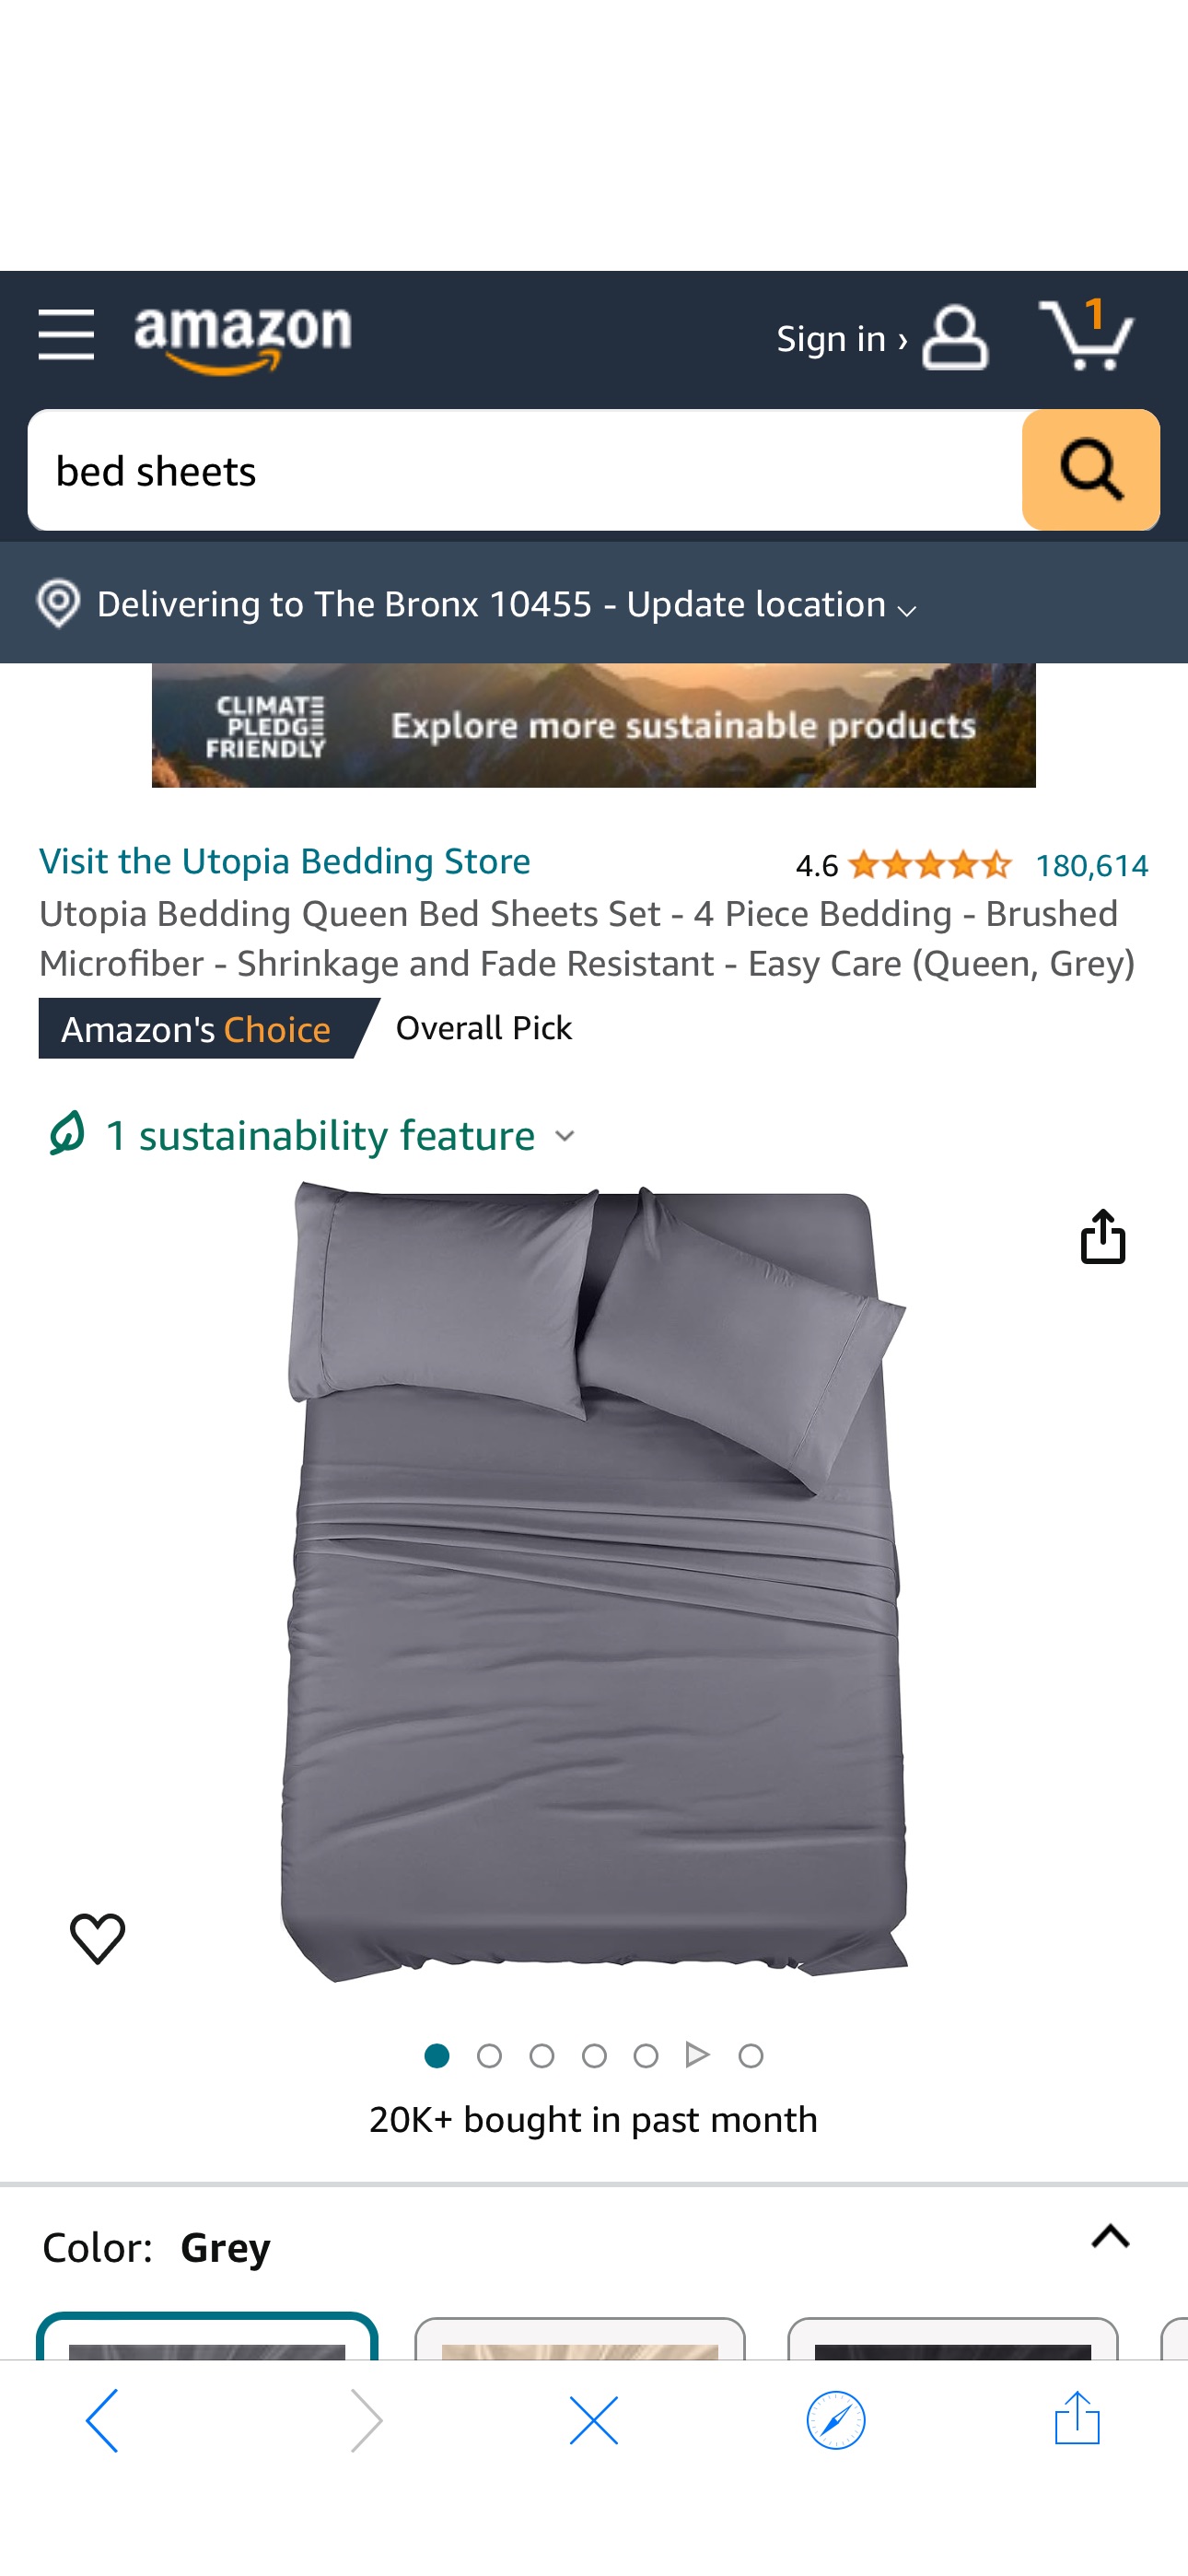 Amazon.com: Utopia Bedding Queen Bed Sheets Set - 4 Piece Bedding - Brushed Microfiber - Shrinkage and Fade Resistant - Easy Care (Queen, Grey) : Home & Kitchen